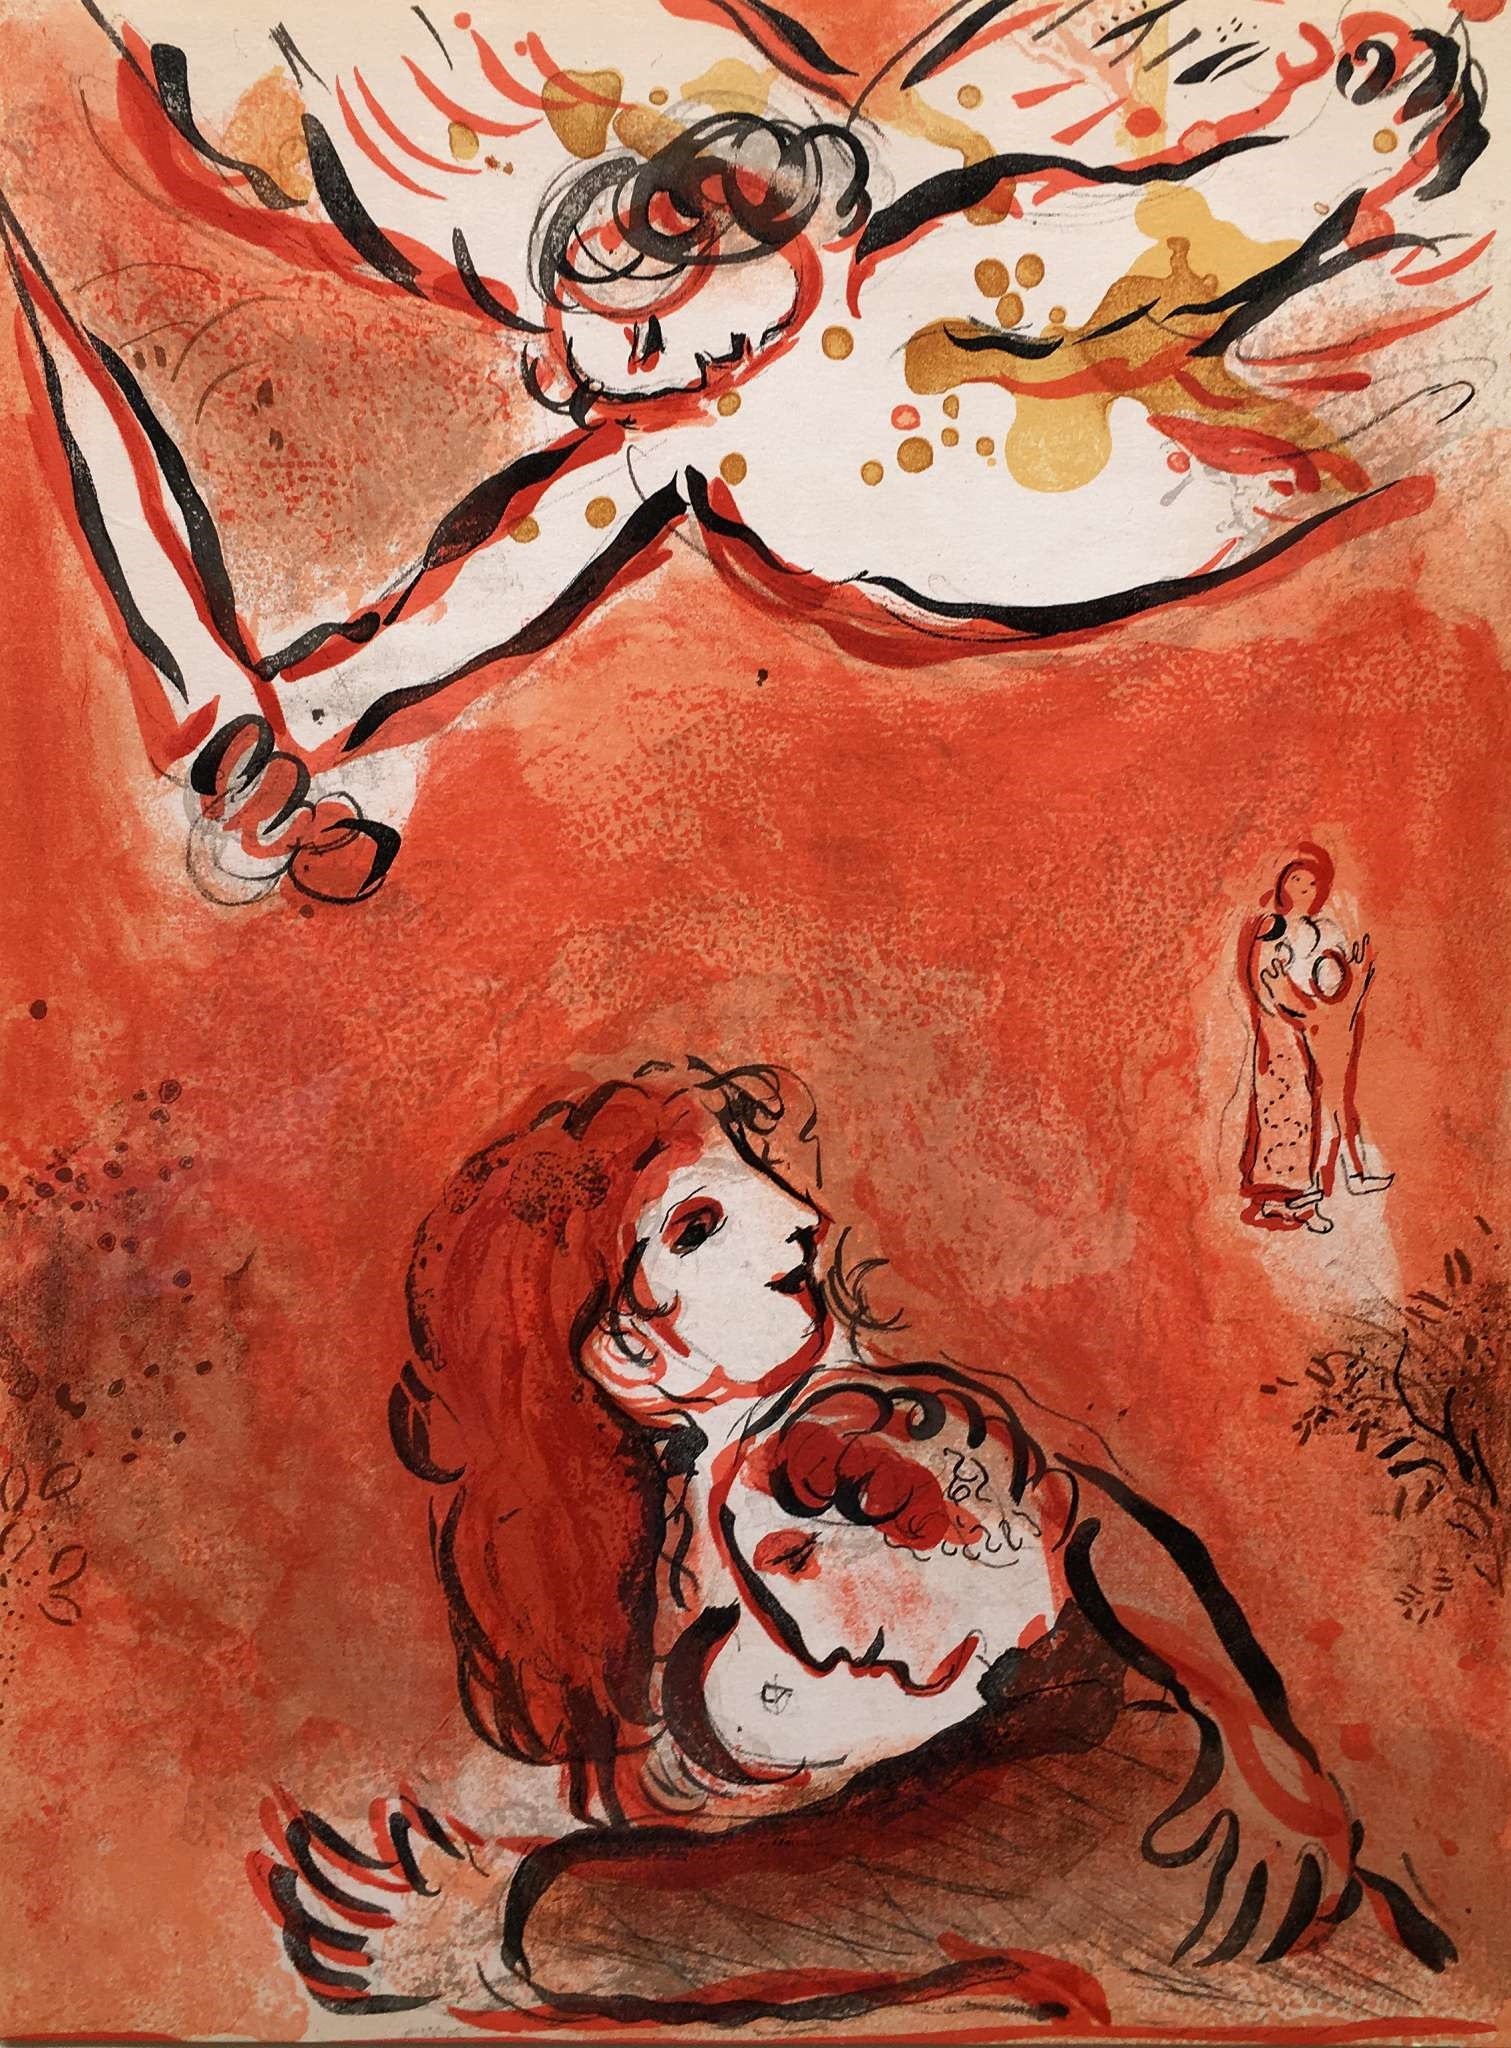 Marc Chagall, Original Lithograph 1960, Drawings for the Bible,The face of Israel